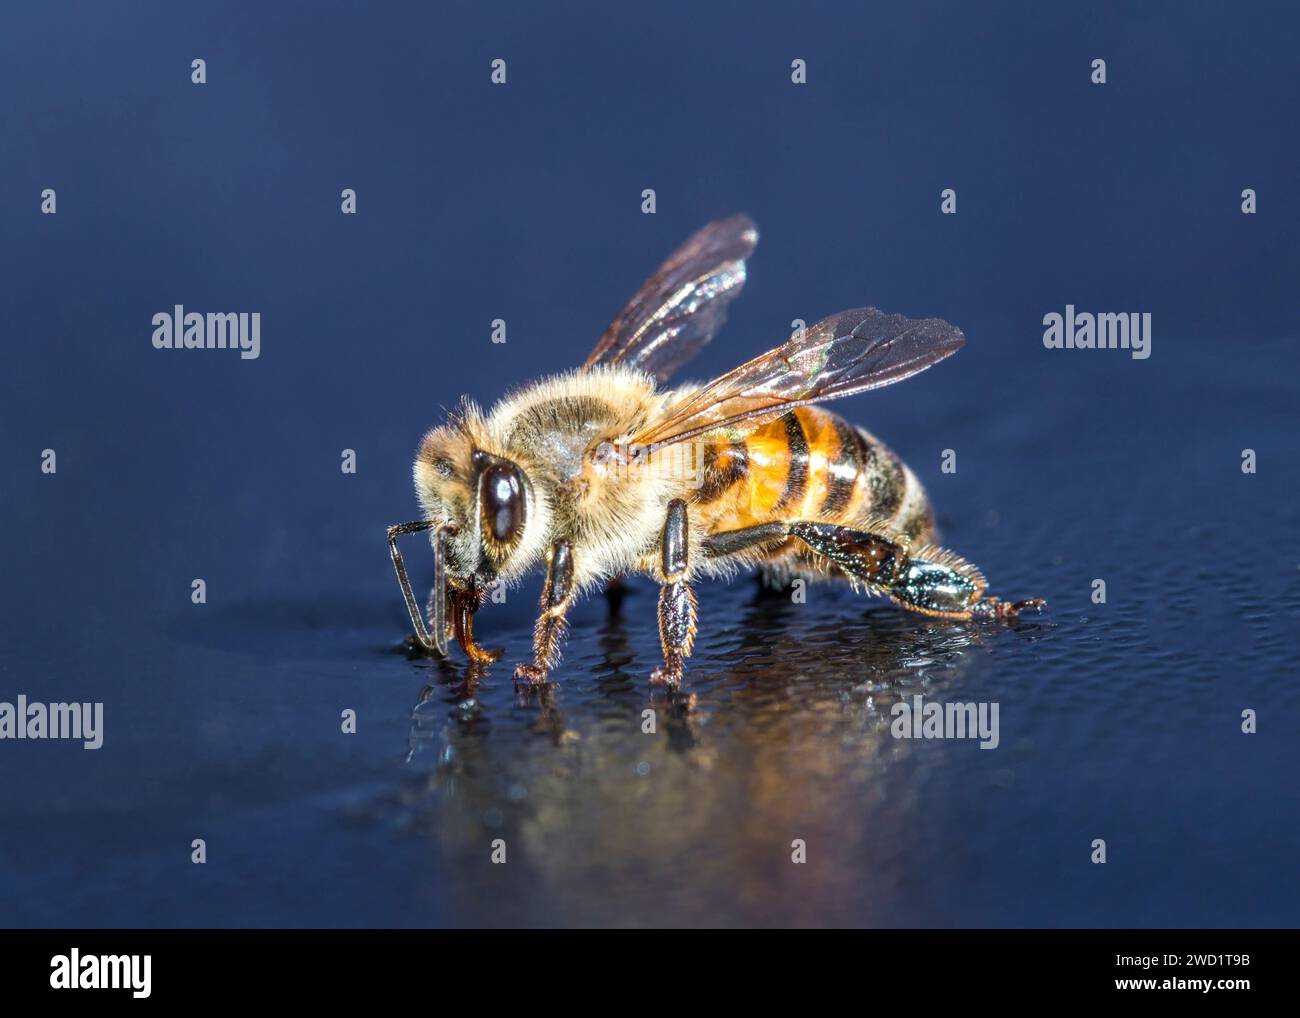 African Honeybee Close-Up Macro Photography South Africa Stock Photo